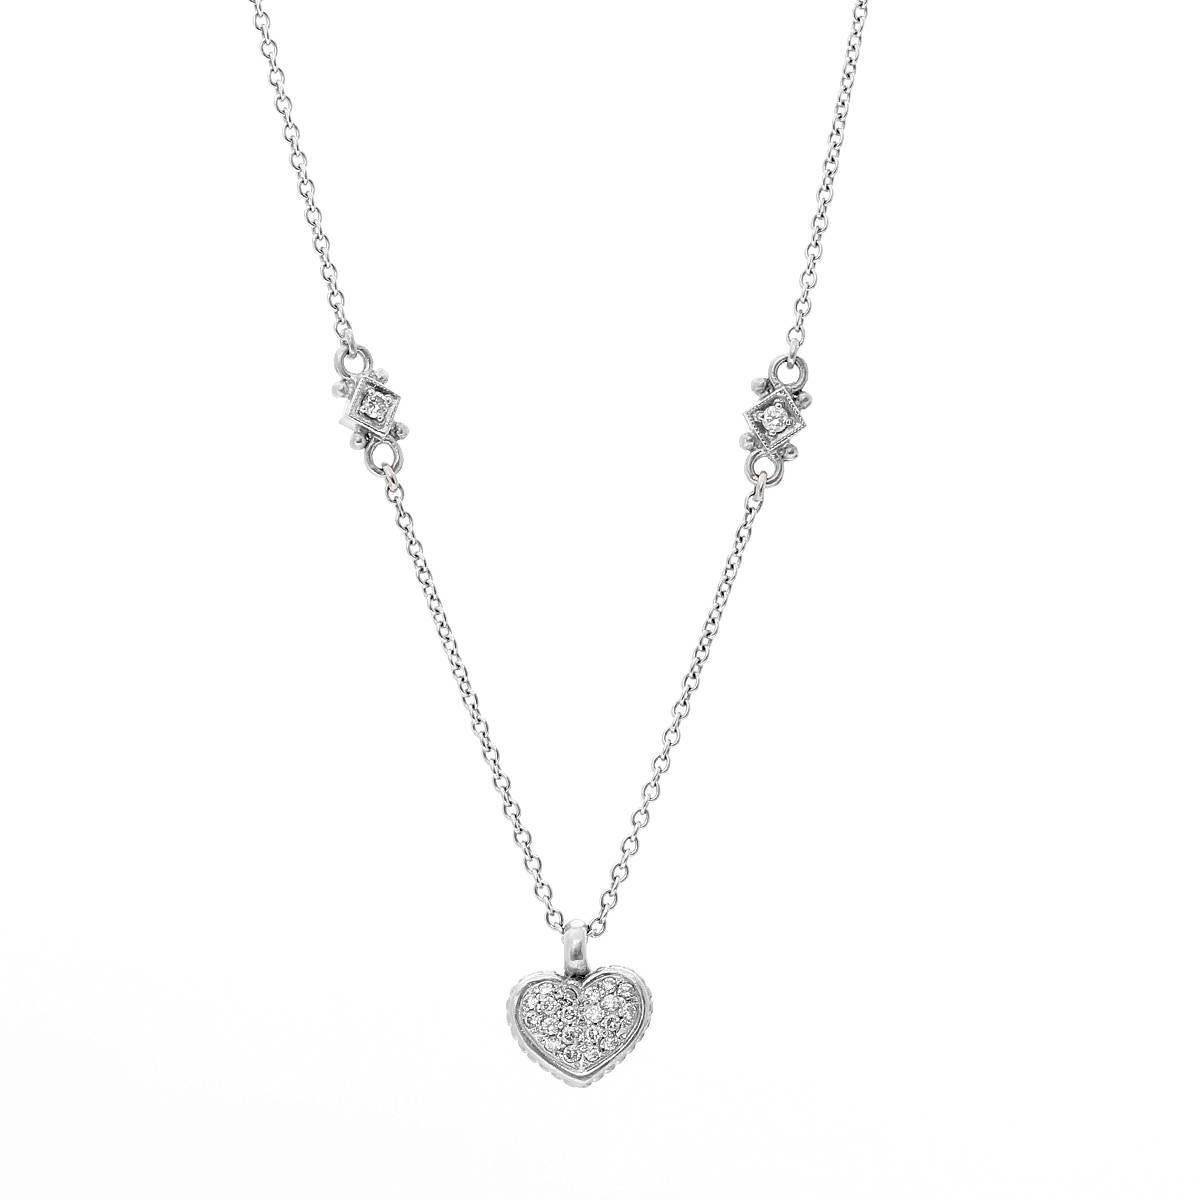 This beautiful Judith Ripka necklace features a pave diamond heart pendant with two diamond stations set in 18K white gold; one on each side. It is apx. 14-1/2 inches in length and weighs 8.3 grams. This necklace is comfortable and great for an